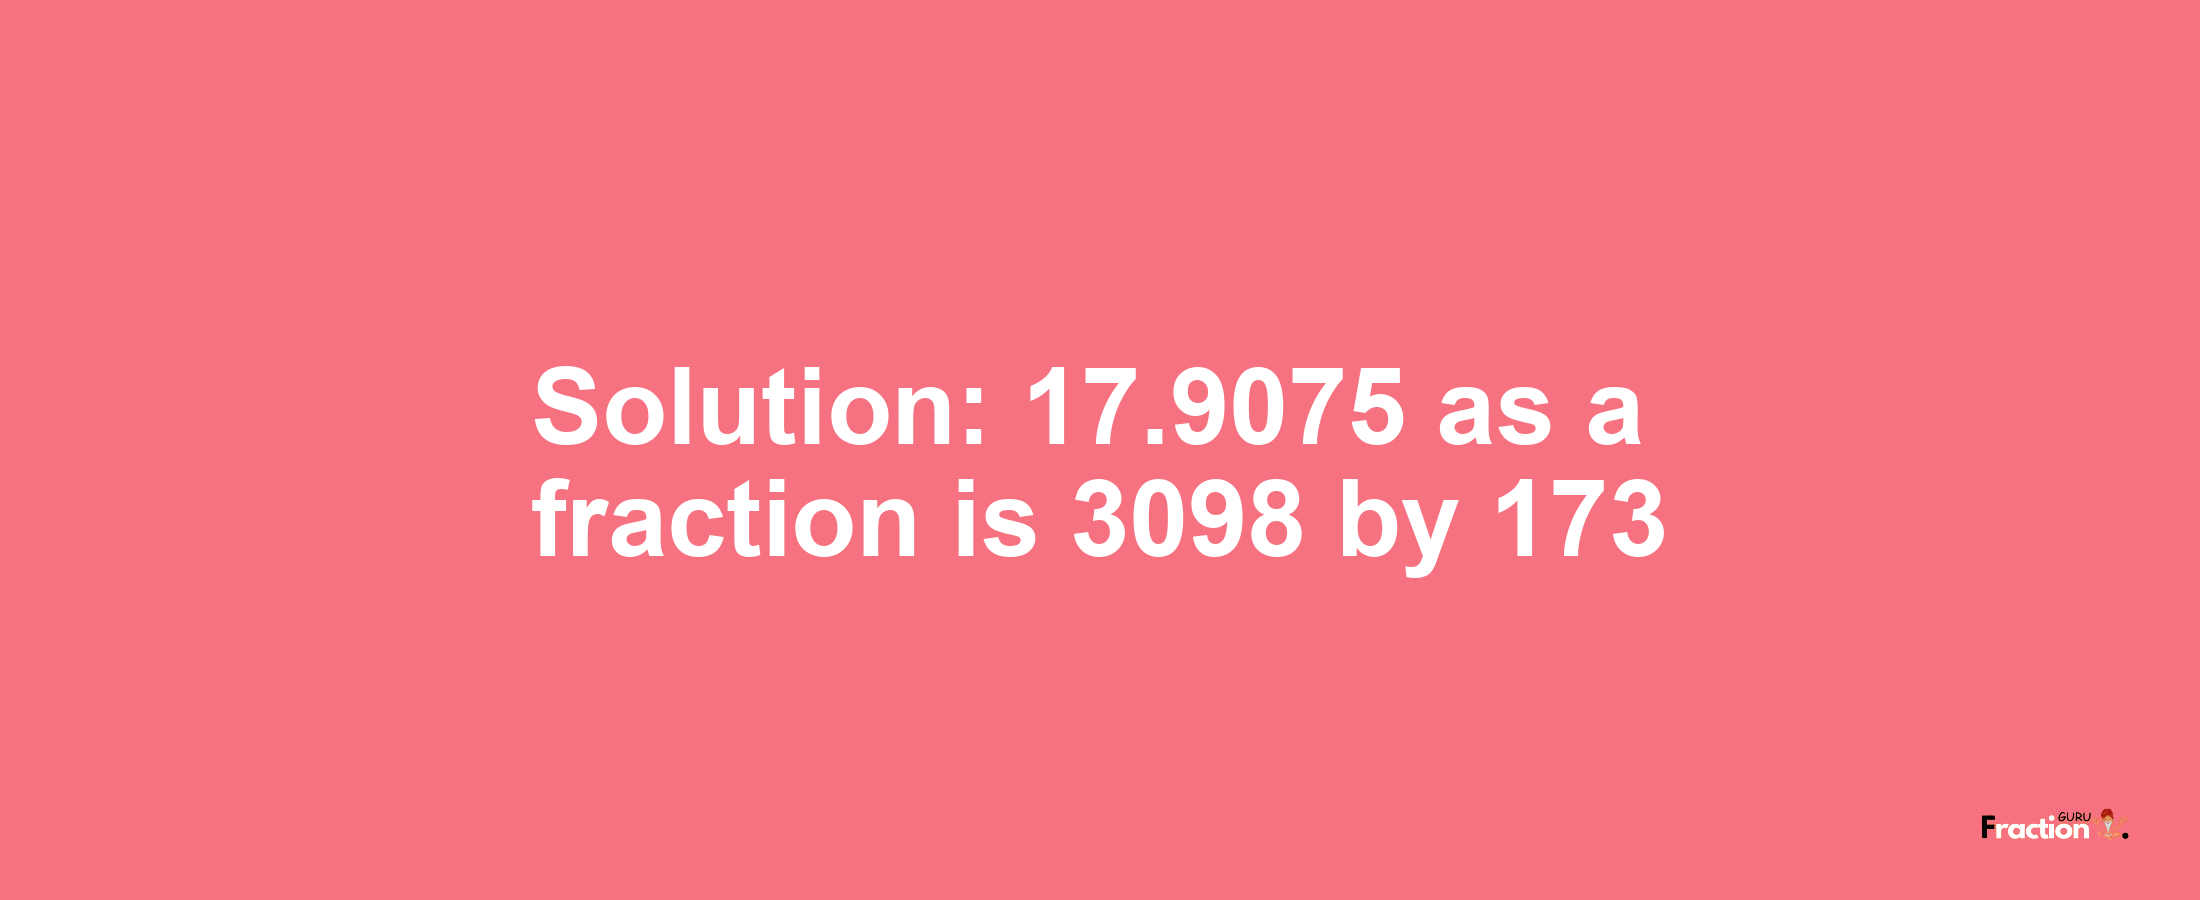 Solution:17.9075 as a fraction is 3098/173